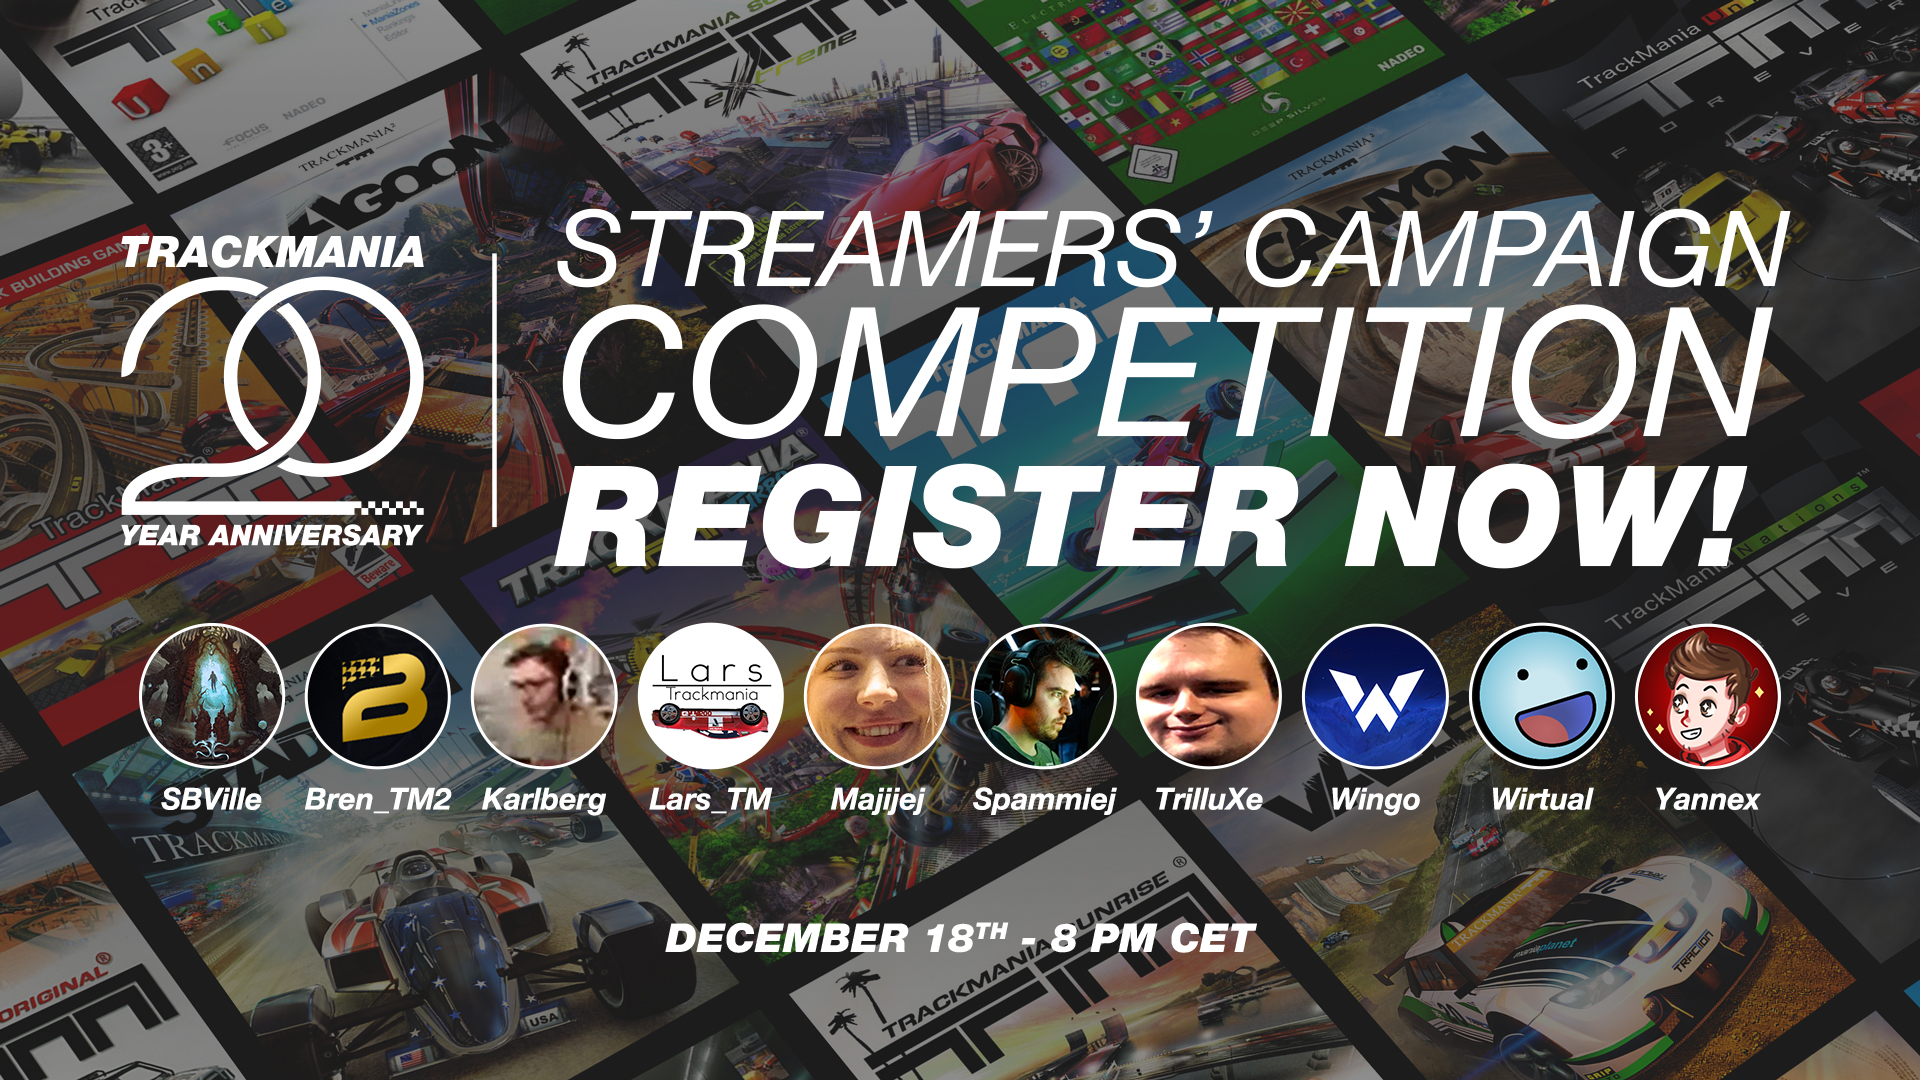 GET READY FOR THE STREAMERS’ CAMPAIGN TOURNAMENT ON DECEMBER 18!